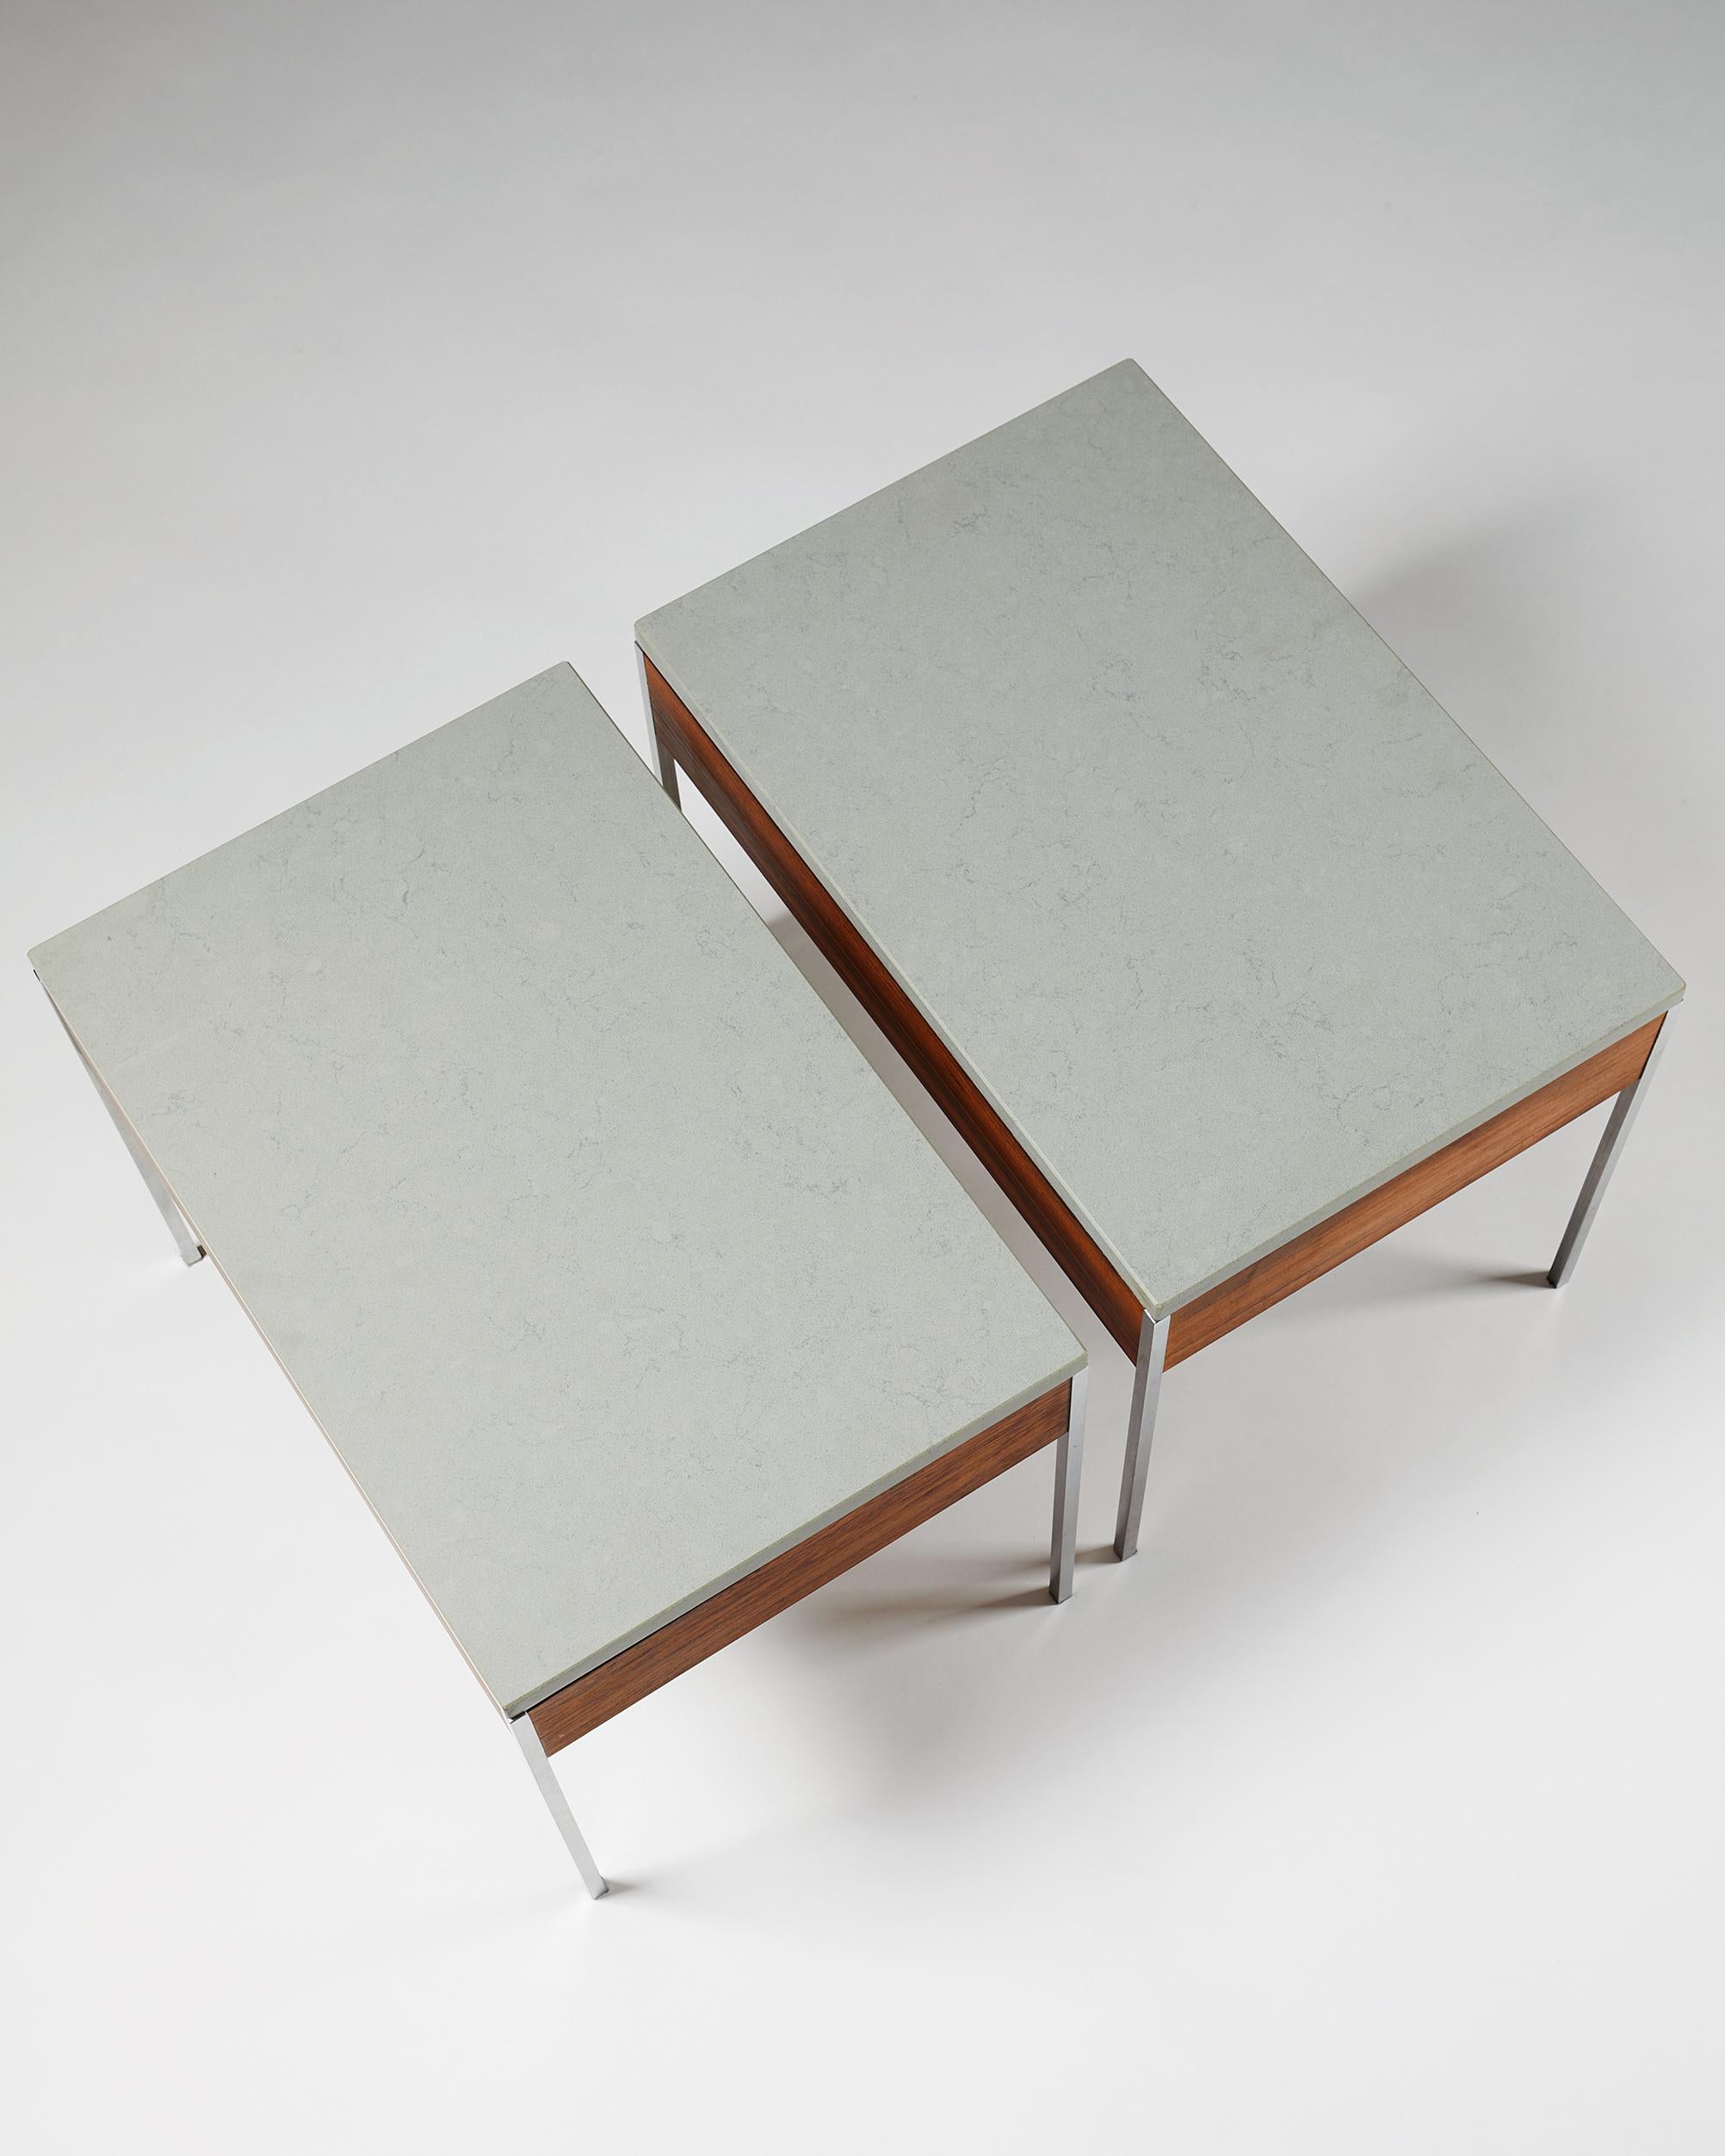 Pair of side table designed by Uno & Östen Kristiansson for Luxus,
Sweden. 1960's.

Rosewood with limestone top.

Measurements:
H: 42 cm / 1' 4